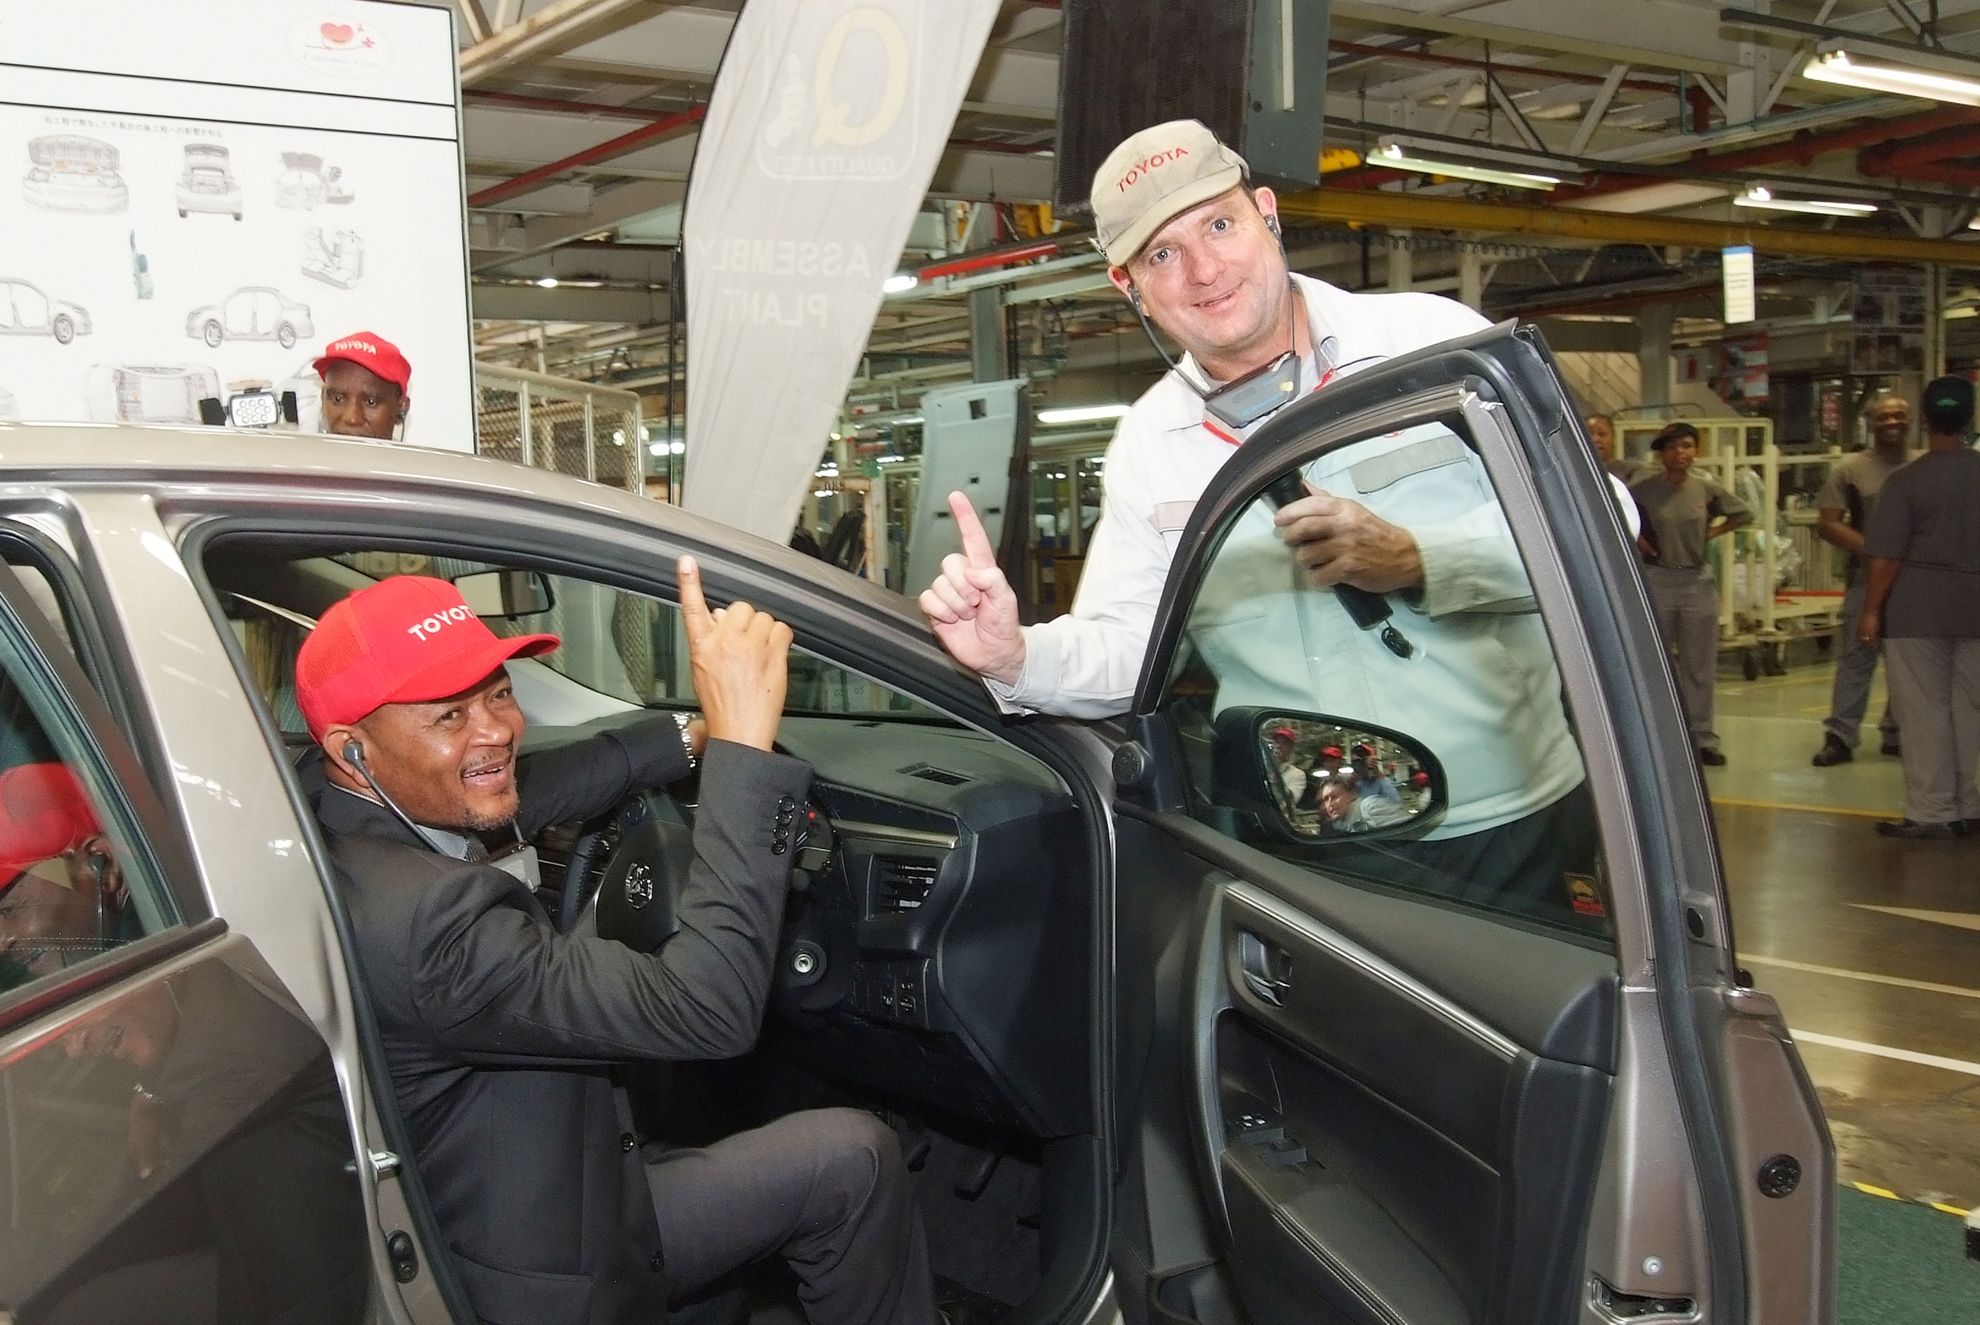 Toyota South Africa Celebrates R1 Billion Investment In New Corolla Production